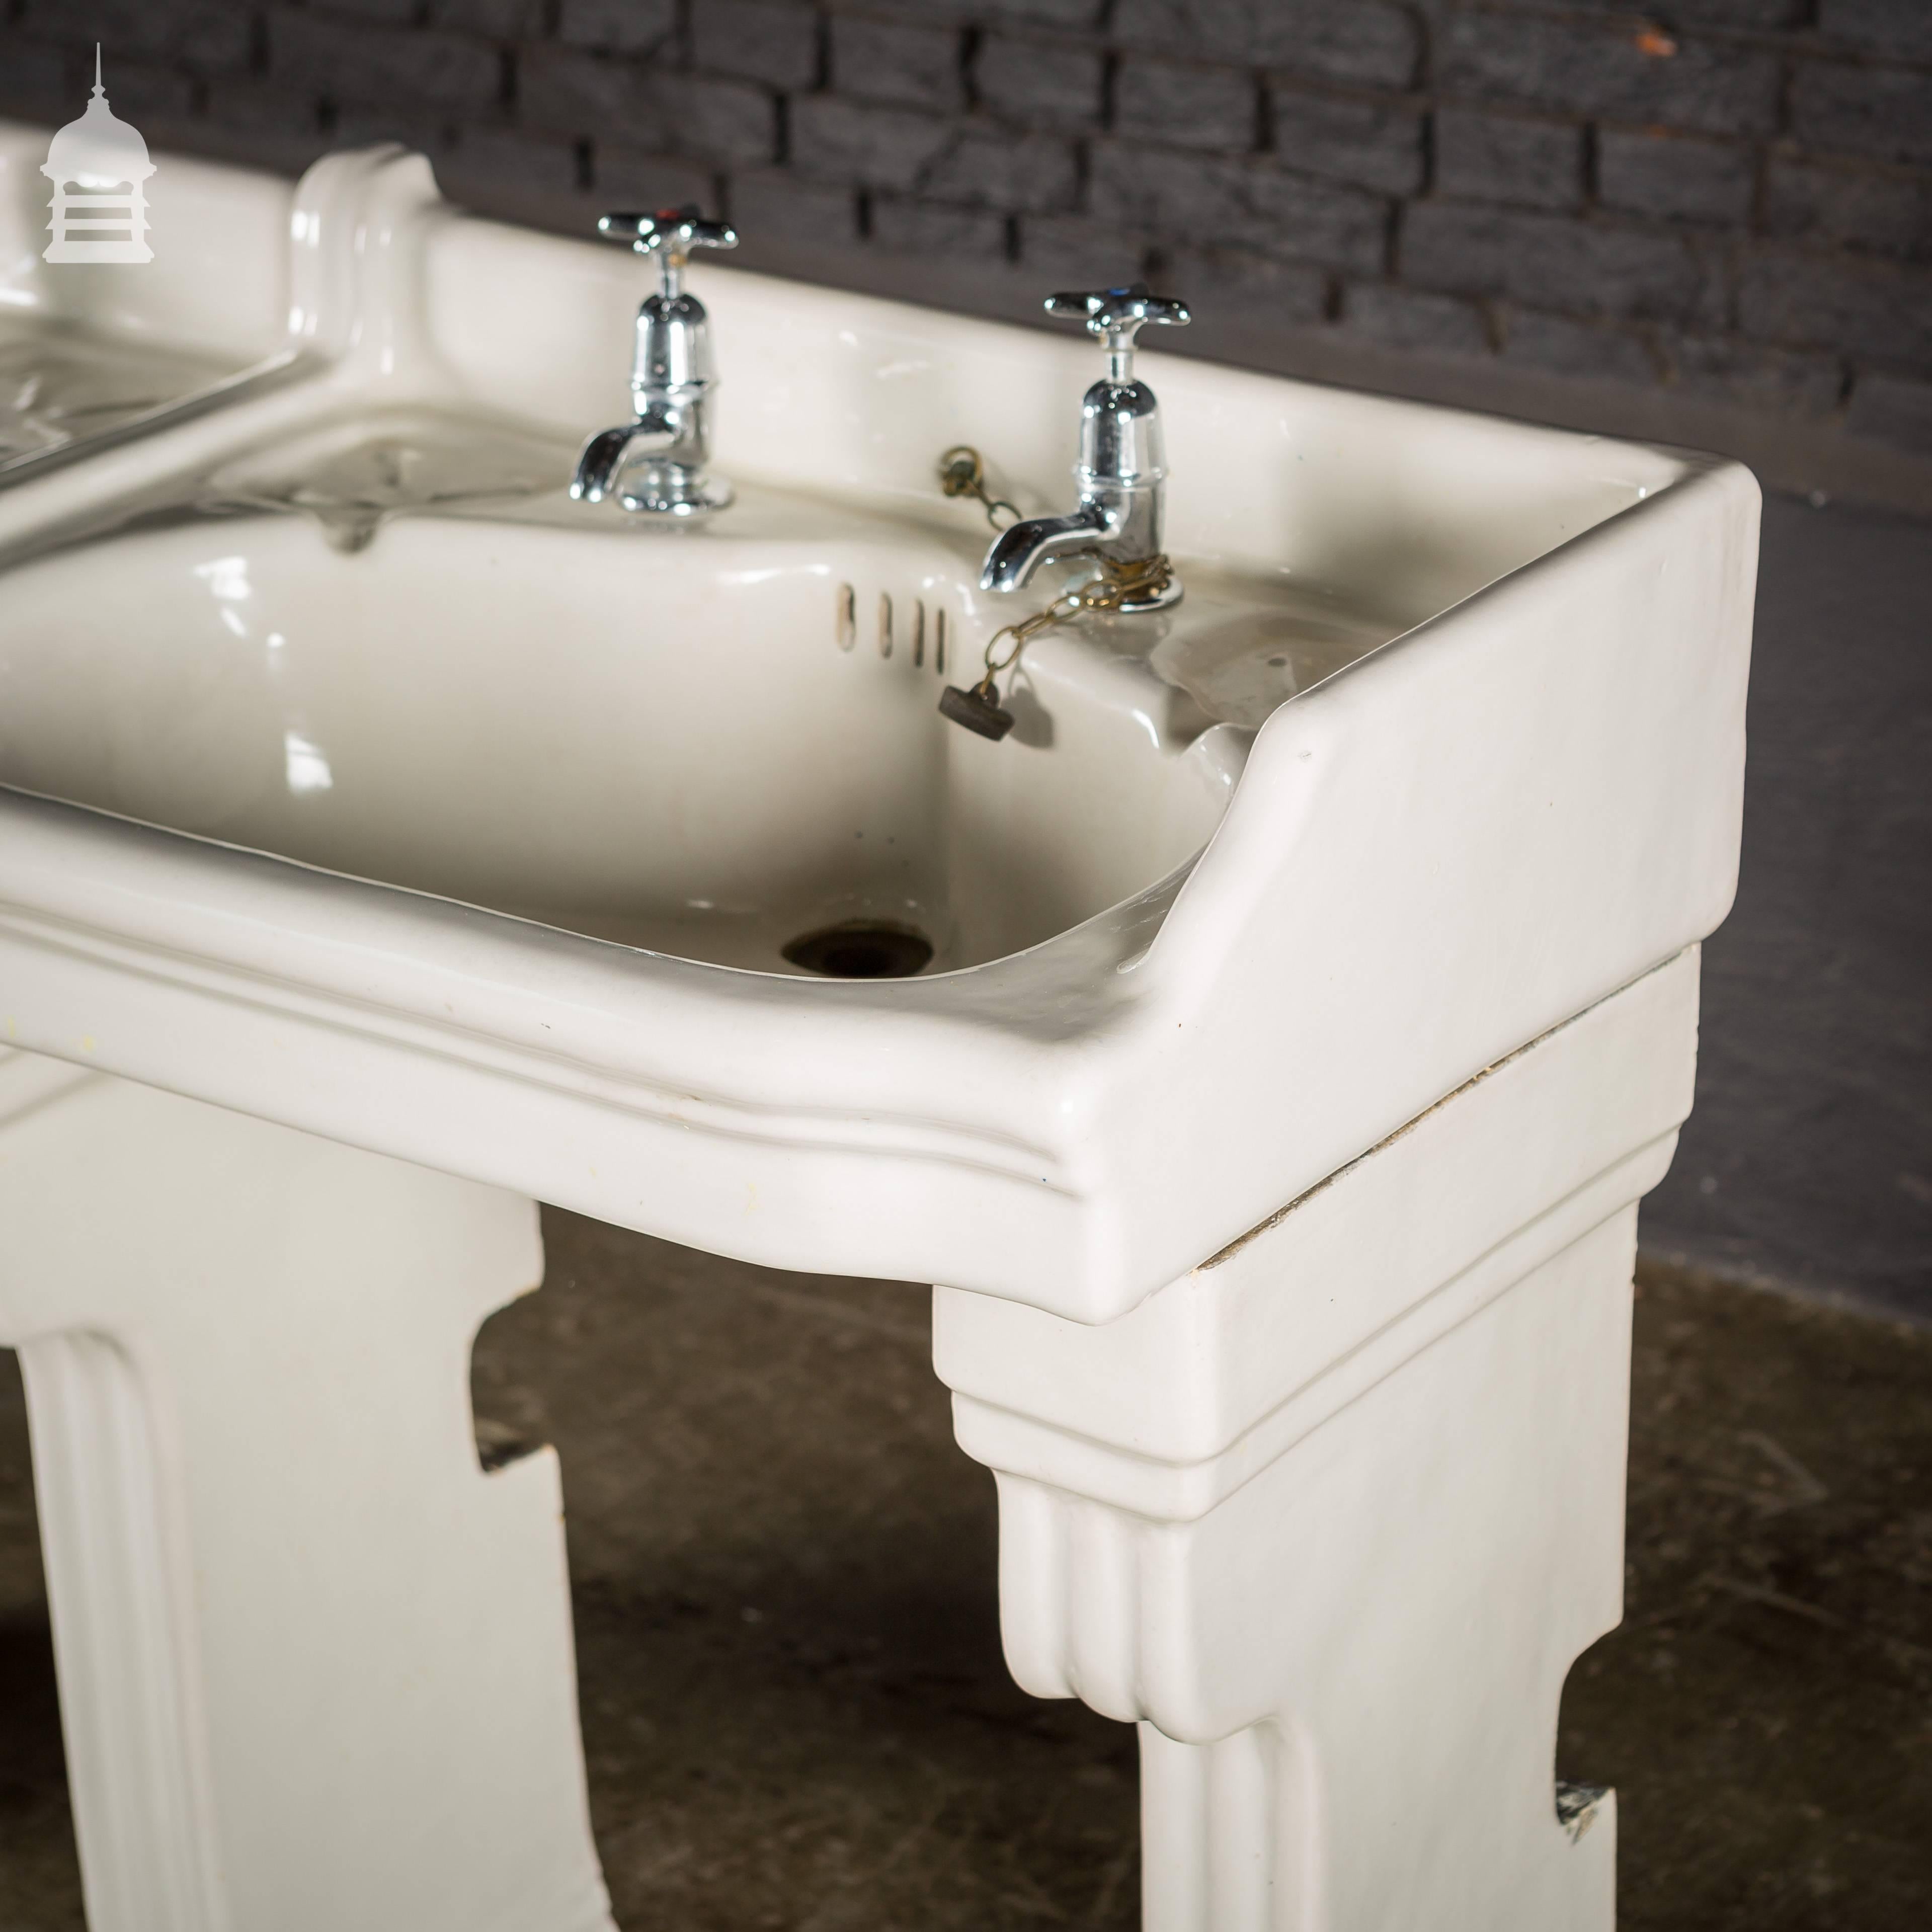 Pair of interlocking wash hand basins double basin on fluted ceramic stands.